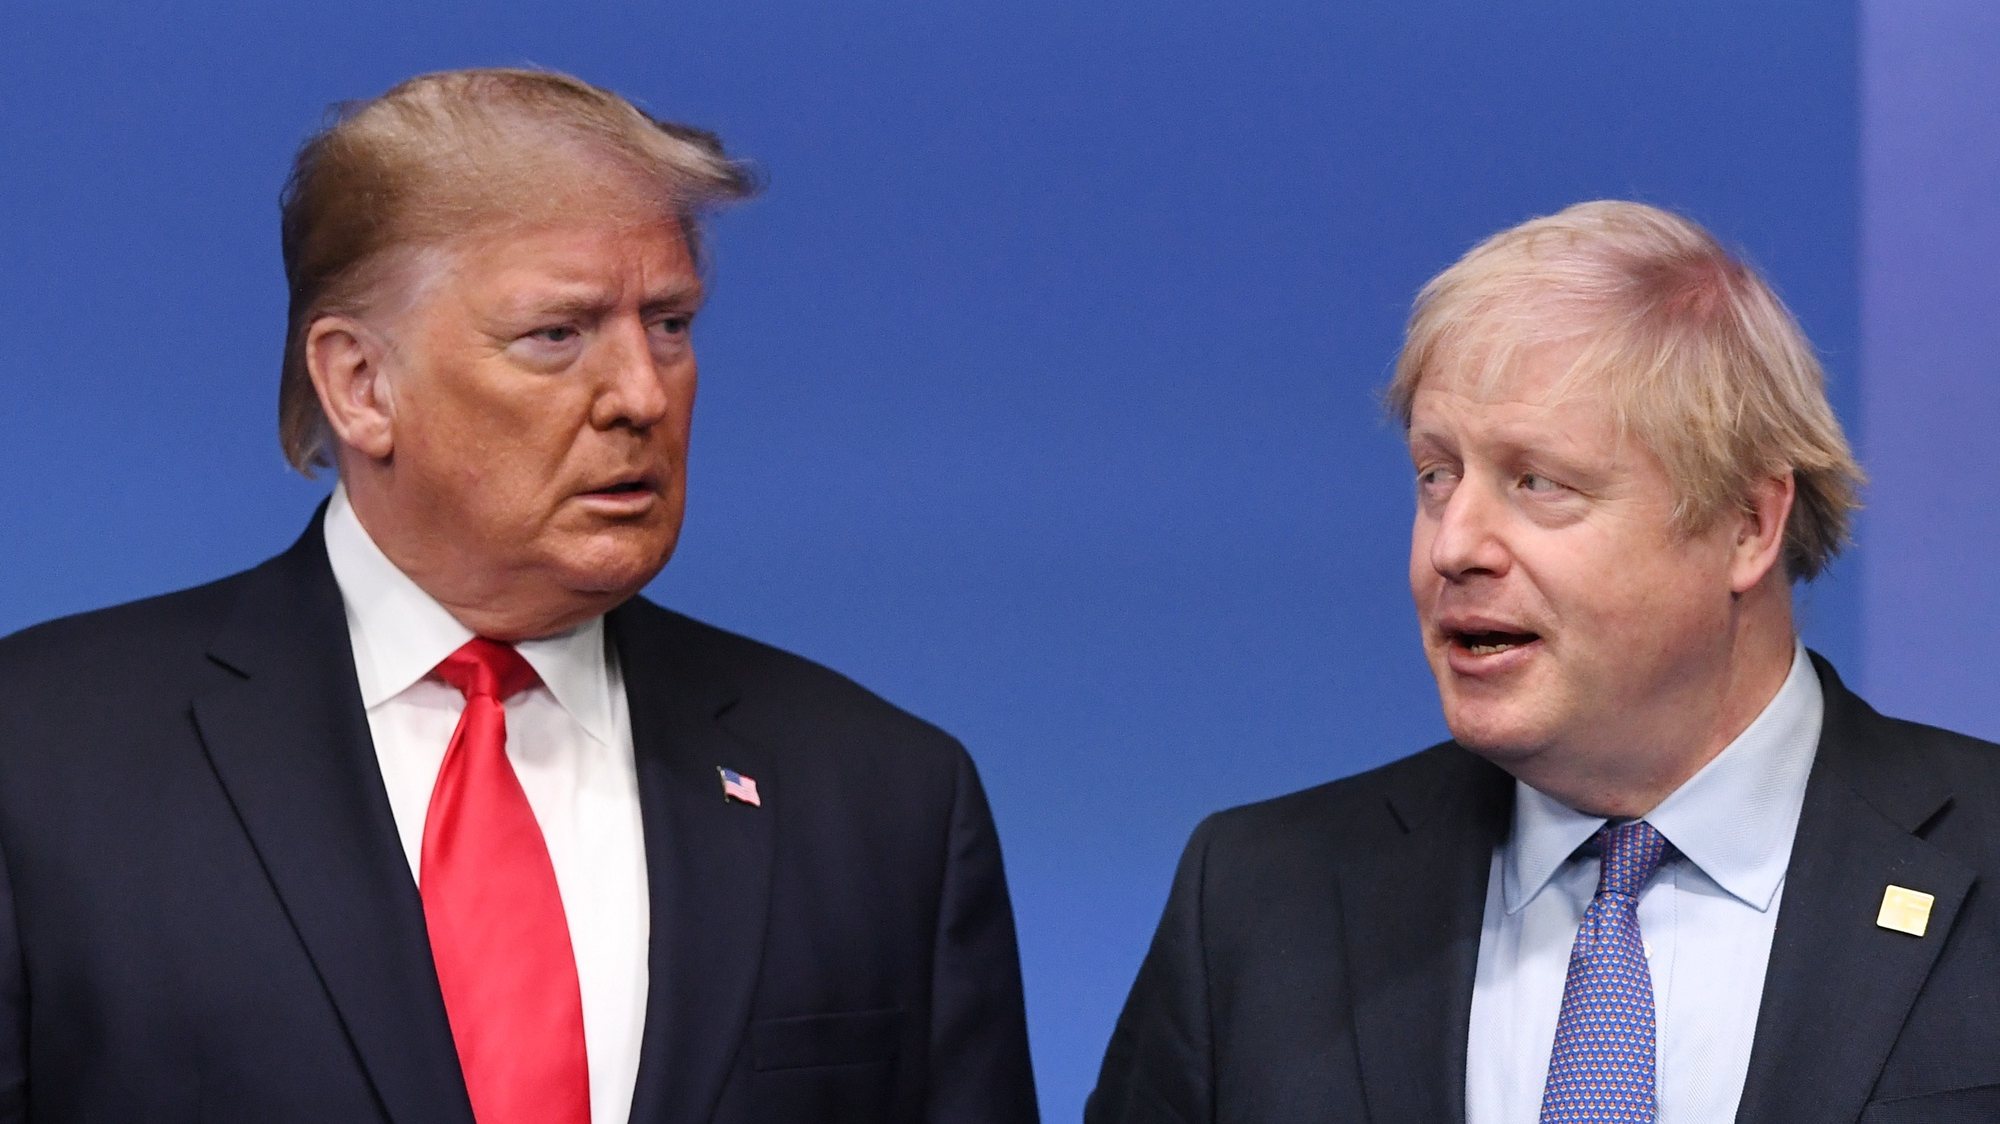 epa08043430 British Prime Minister Boris Johnson (R) with US President Donald J. Trump (L) during the NATO Summit in London, Britain, 04 December 2019. NATO countries&#039; heads of states and governments gather in London for a two-day meeting.  EPA/FACUNDO ARRIZABALAGA